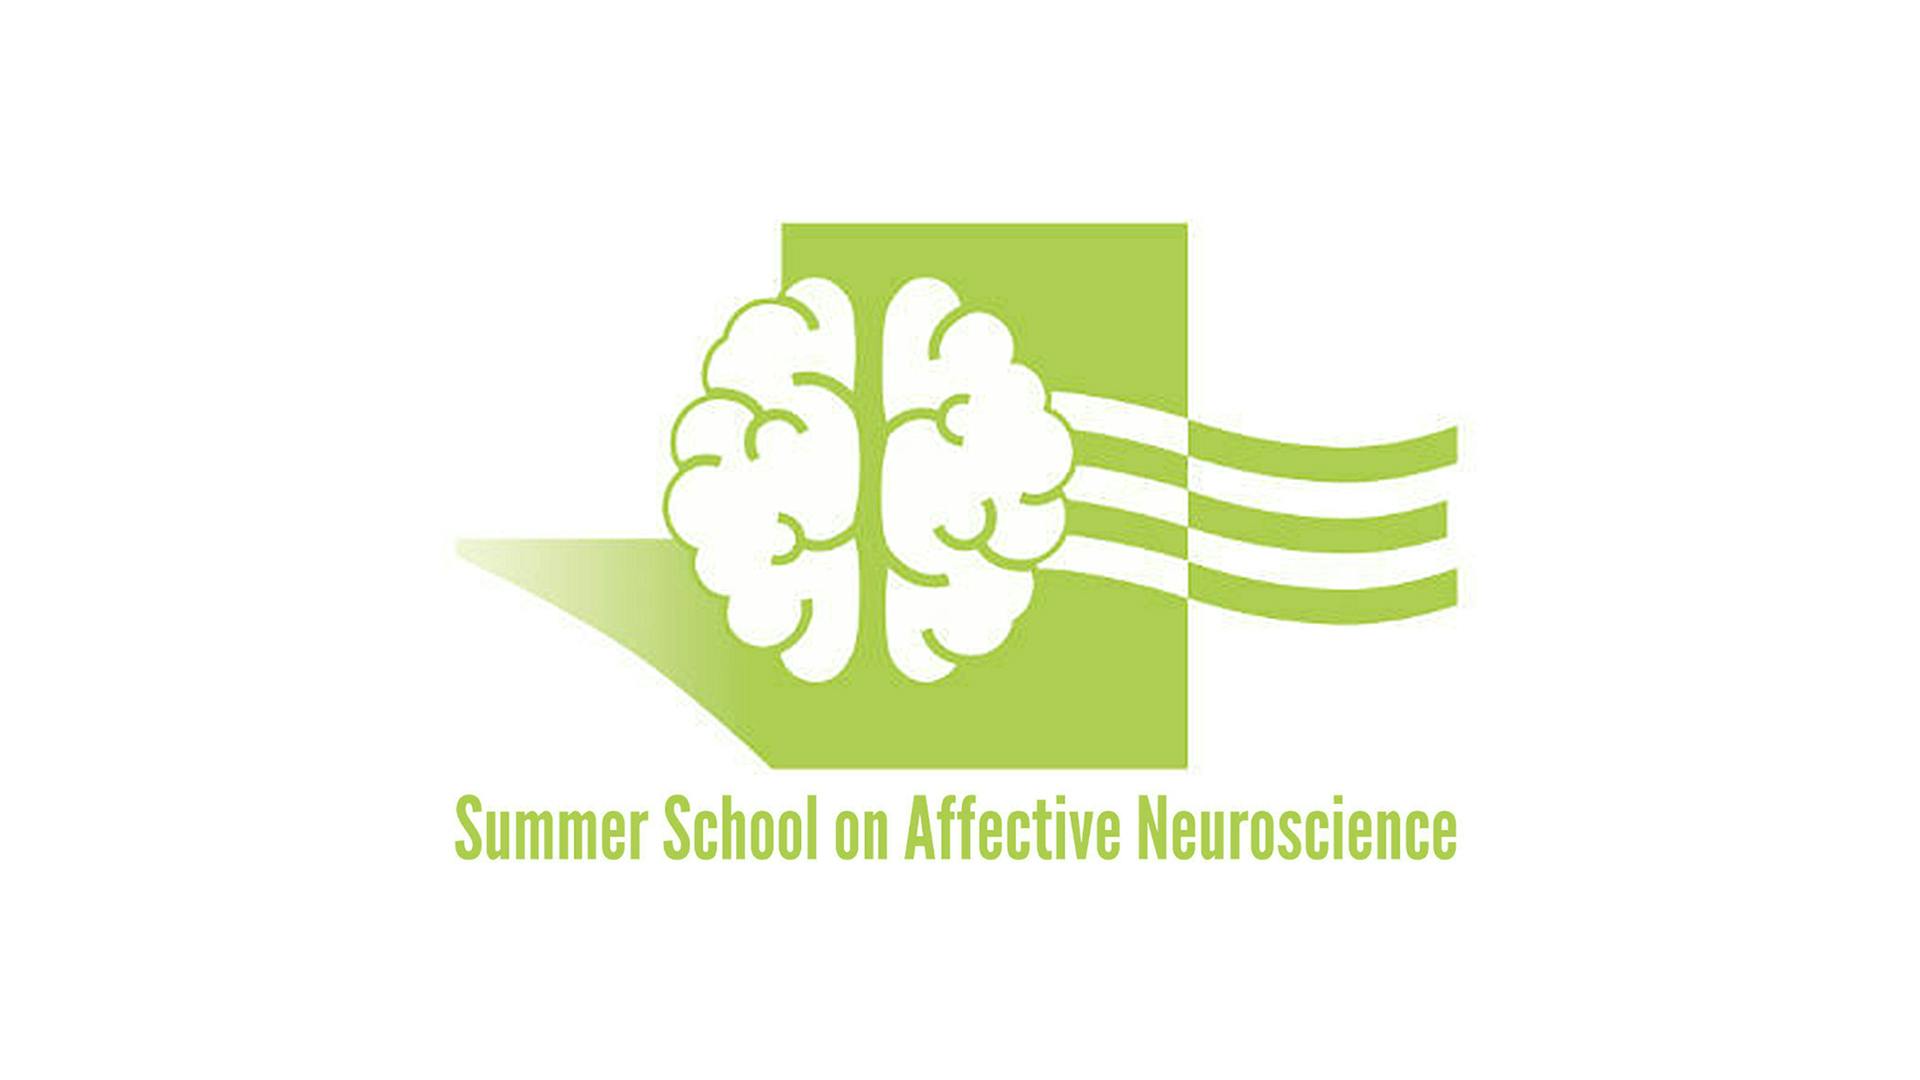 Logo of the Summer School on Affective Neuroscience: a stylized brain on a green background.